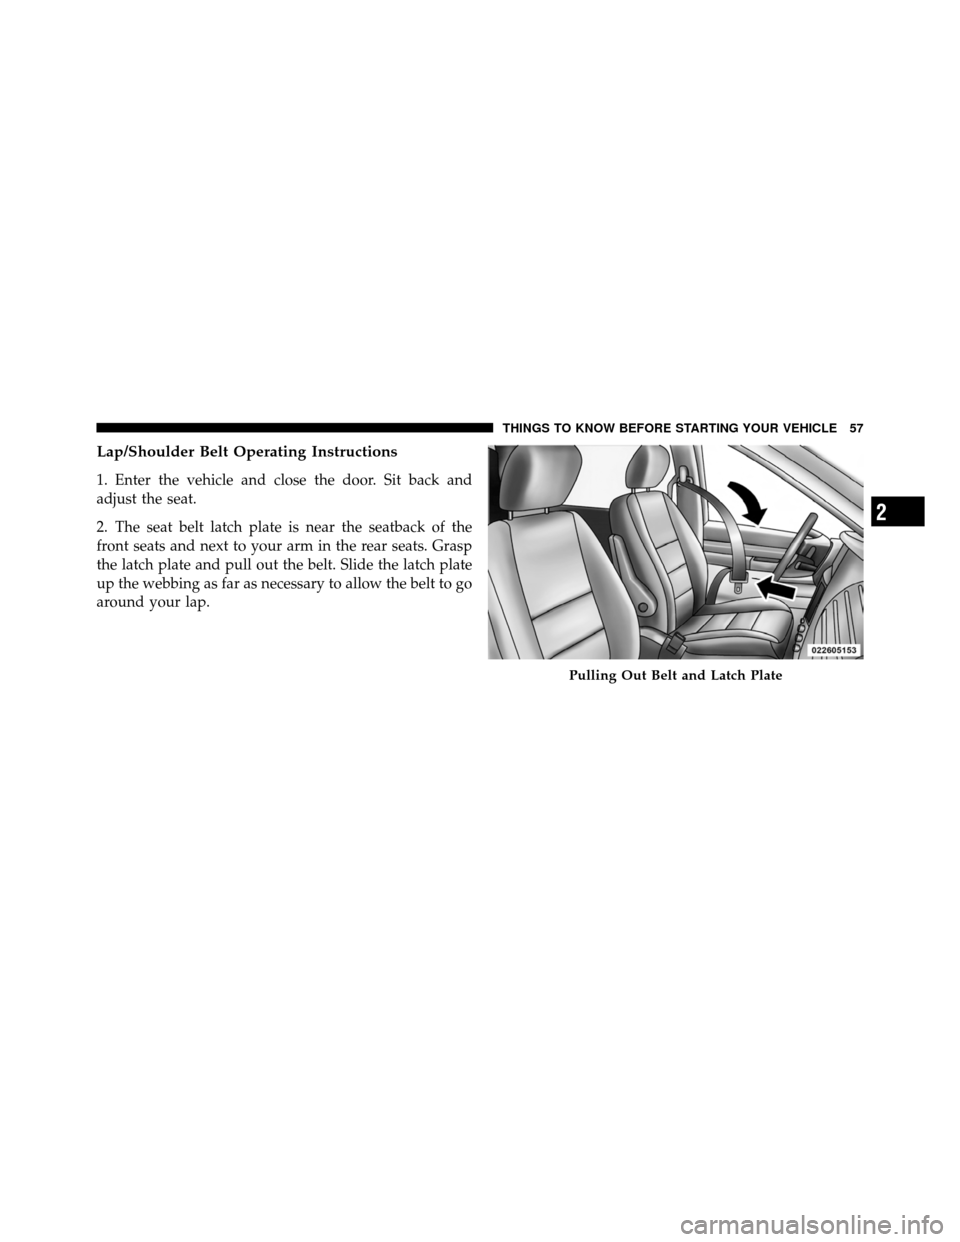 DODGE GRAND CARAVAN 2012 5.G Owners Manual Lap/Shoulder Belt Operating Instructions
1. Enter the vehicle and close the door. Sit back and
adjust the seat.
2. The seat belt latch plate is near the seatback of the
front seats and next to your ar